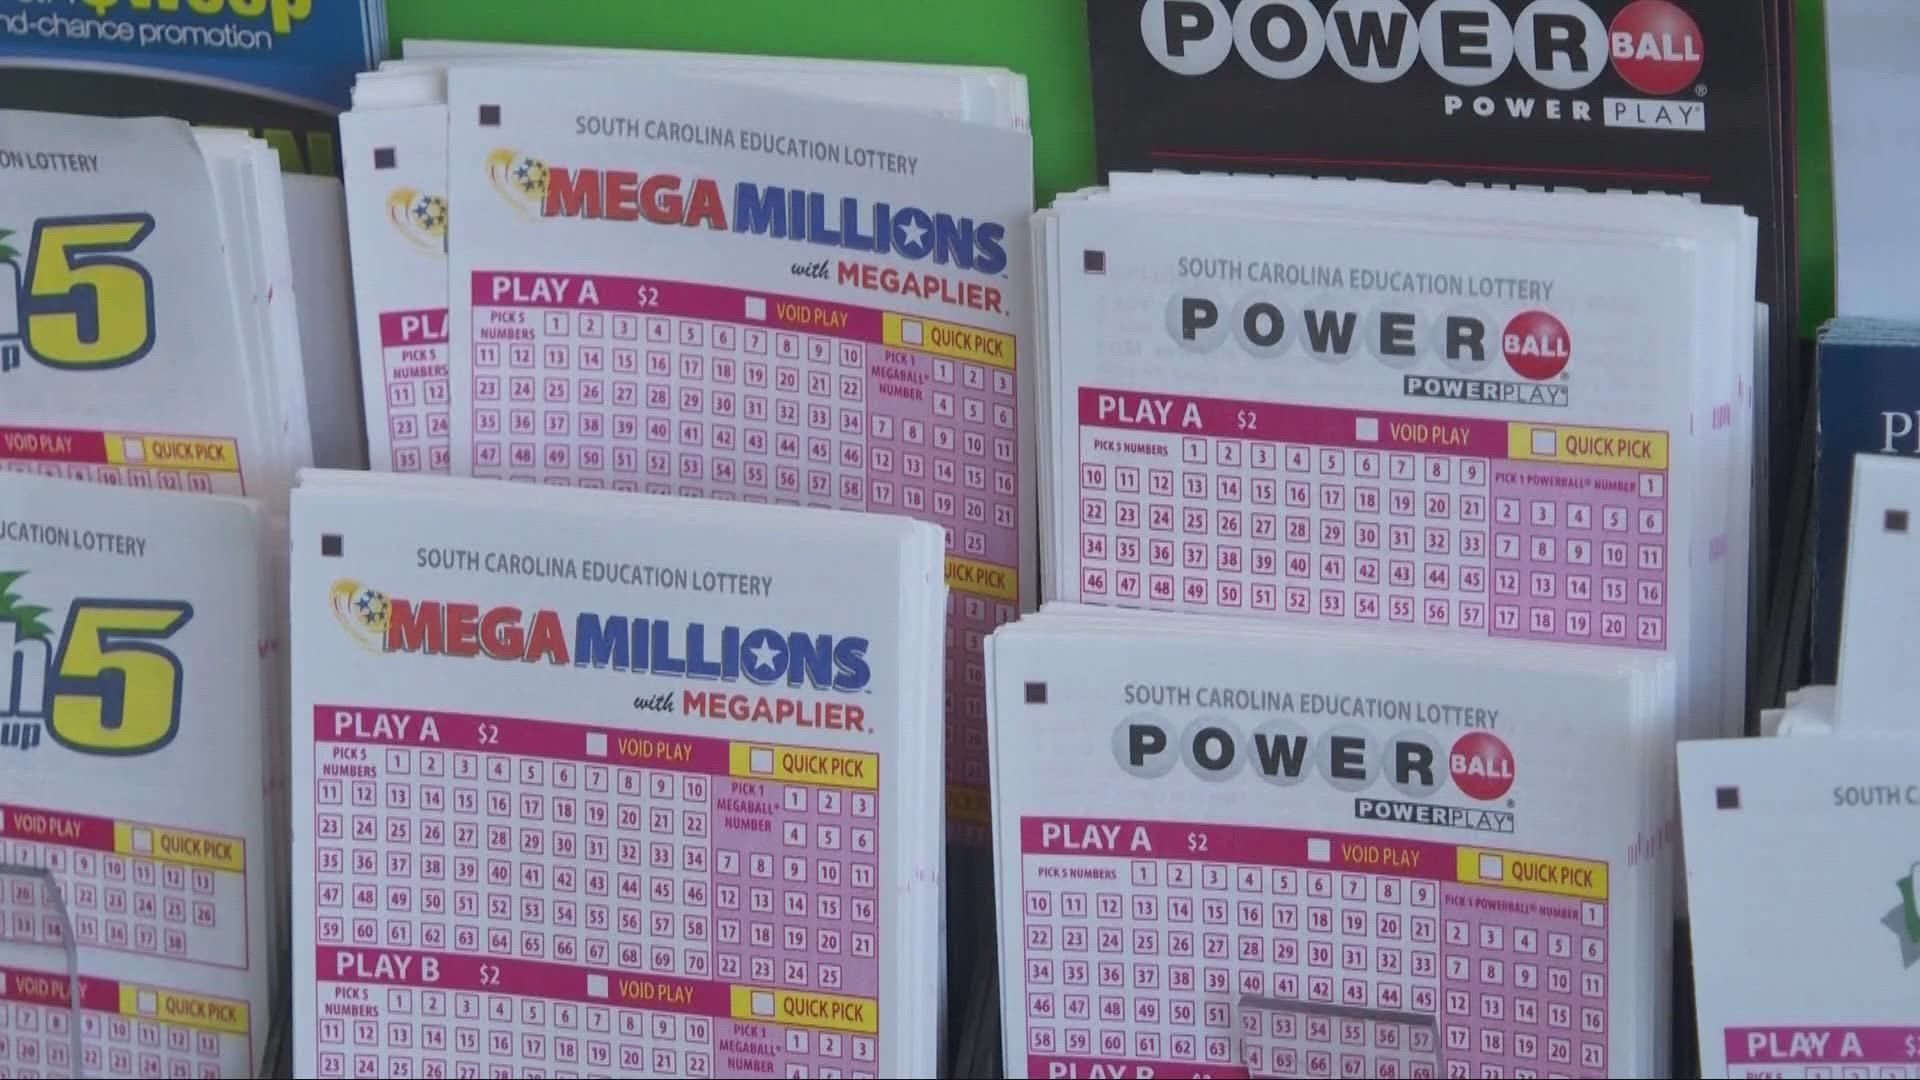 The jackpot up for grabs during Tuesday night's drawing inched closer to breaking the billion dollar mark: $810 million, or $470.1 million for the cash option.